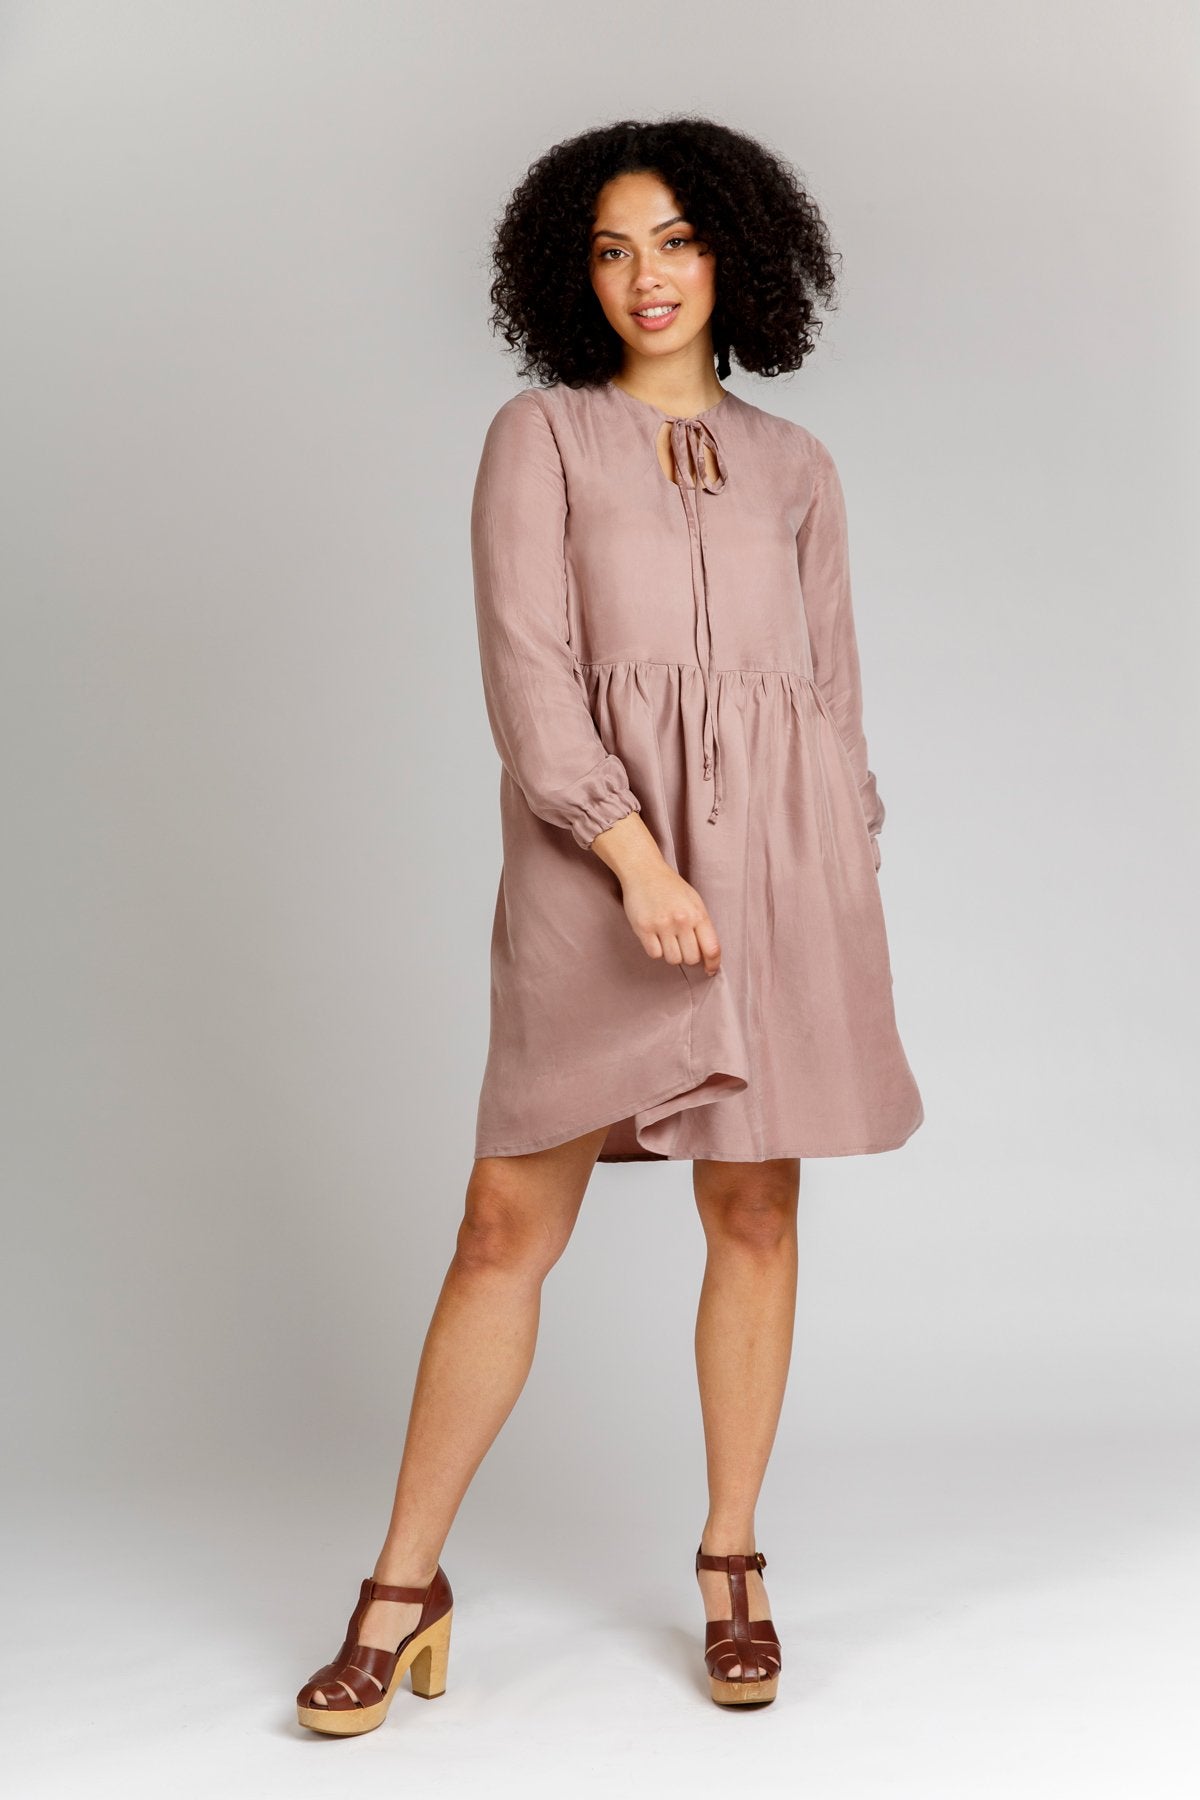 Woman wearing the Sudley Dress sewing pattern from Megan Nielsen on The Fold Line. A dress pattern made in crepe de chine, cotton, voile, batiste, crepe, lawn, silk charmeuse, georgette, challis, rayon, linen and chambray fabrics, featuring a reversible s